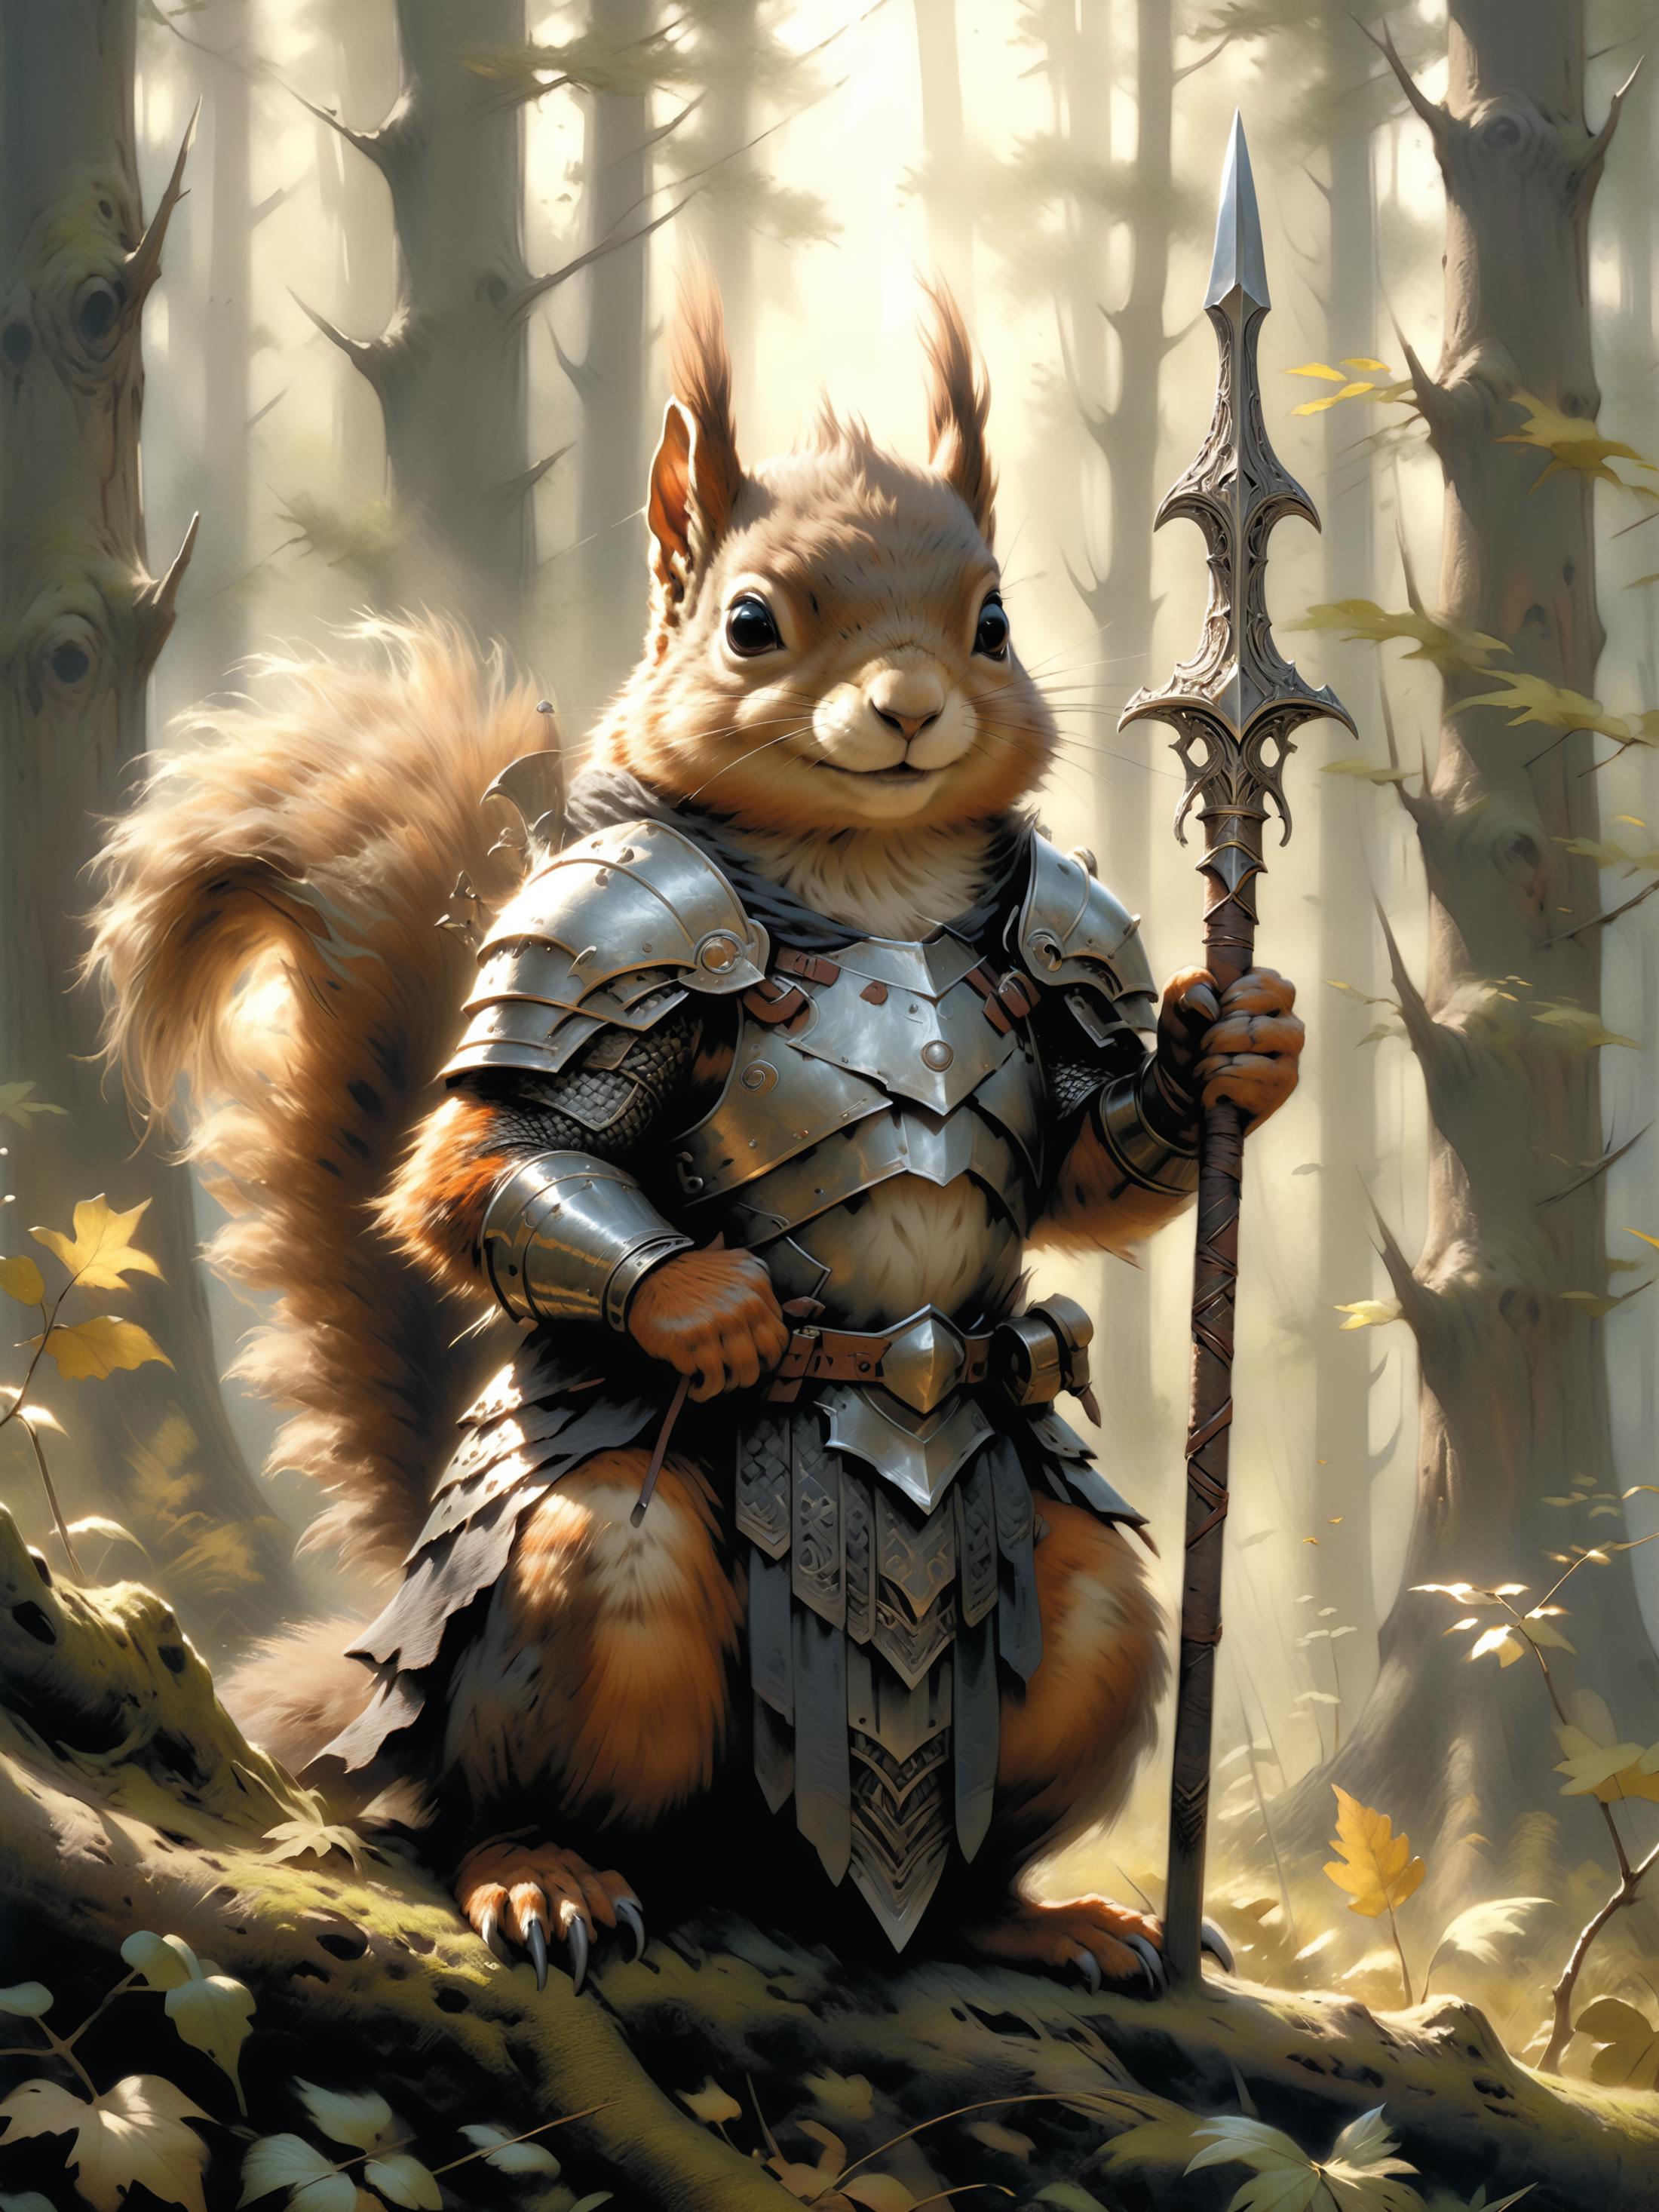 A cartoon squirrel in a suit of armor holding a spear.